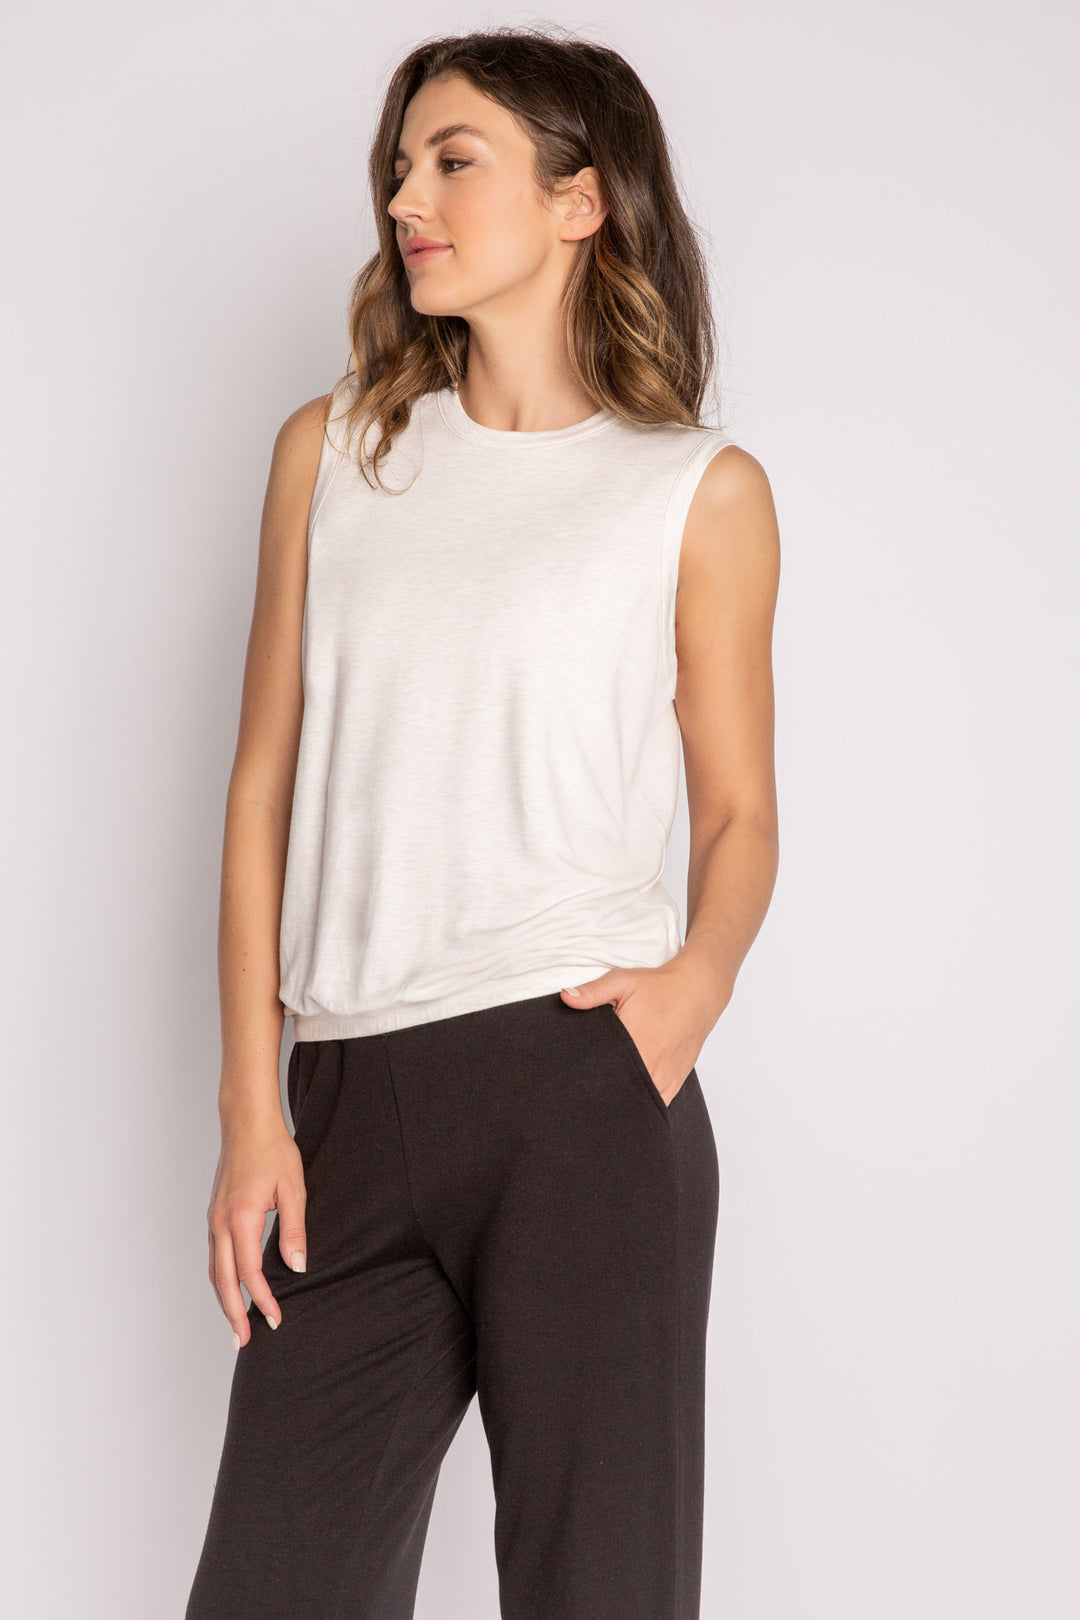 Oatmeal crew neck tank top with banded, cinched waist. (7122608881764)